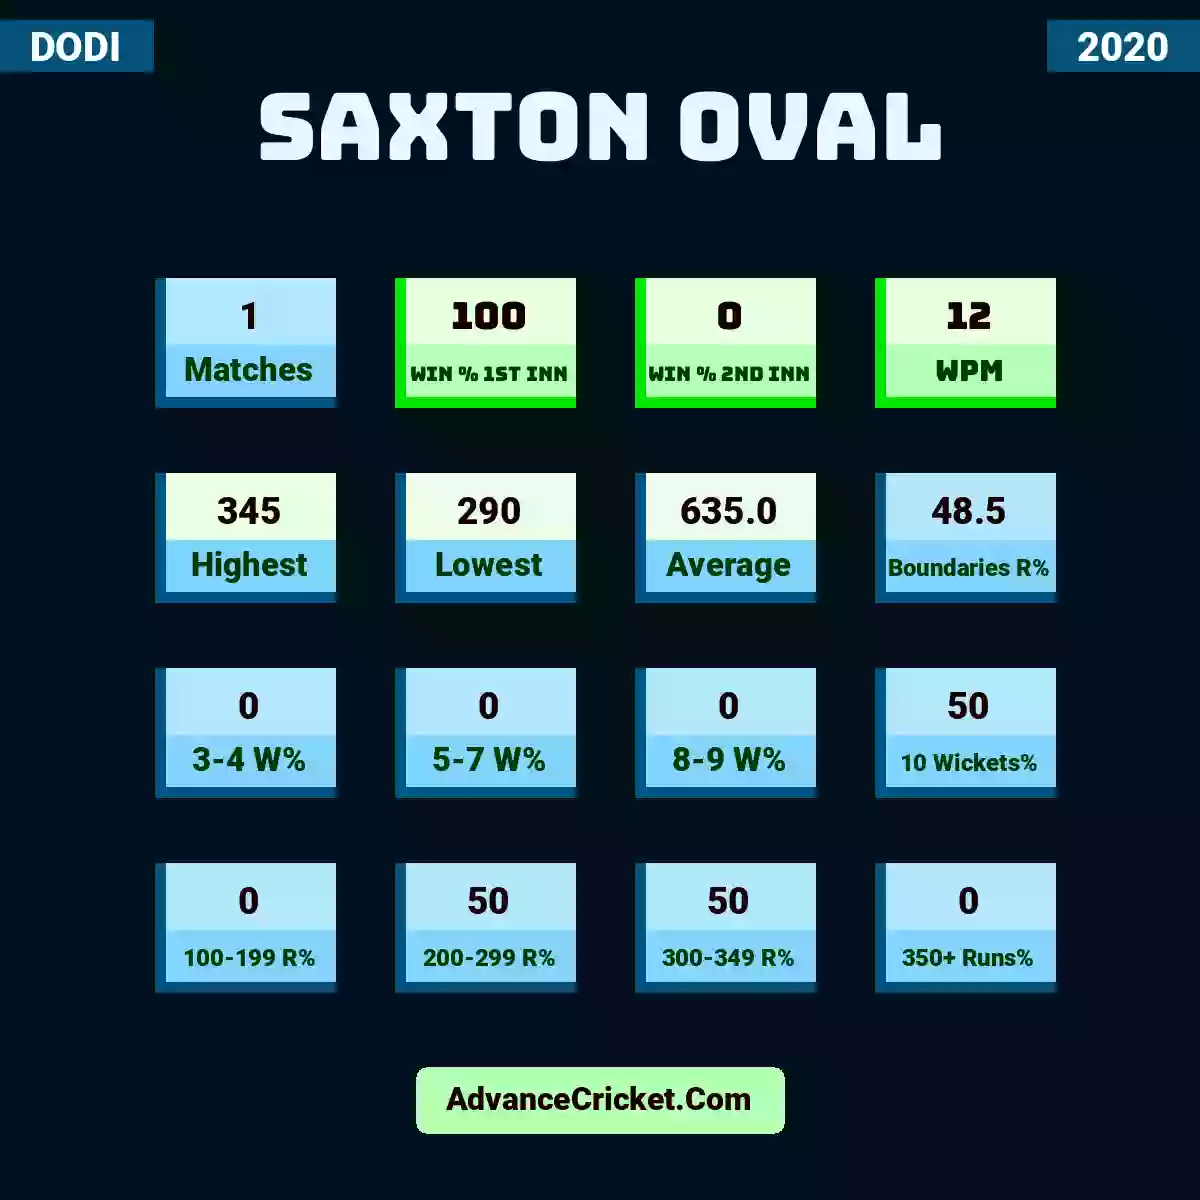 Image showing Saxton Oval with Matches: 1, Win % 1st Inn: 100, Win % 2nd Inn: 0, WPM: 12, Highest: 345, Lowest: 290, Average: 635.0, Boundaries R%: 48.5, 3-4 W%: 0, 5-7 W%: 0, 8-9 W%: 0, 10 Wickets%: 50, 100-199 R%: 0, 200-299 R%: 50, 300-349 R%: 50, 350+ Runs%: 0.